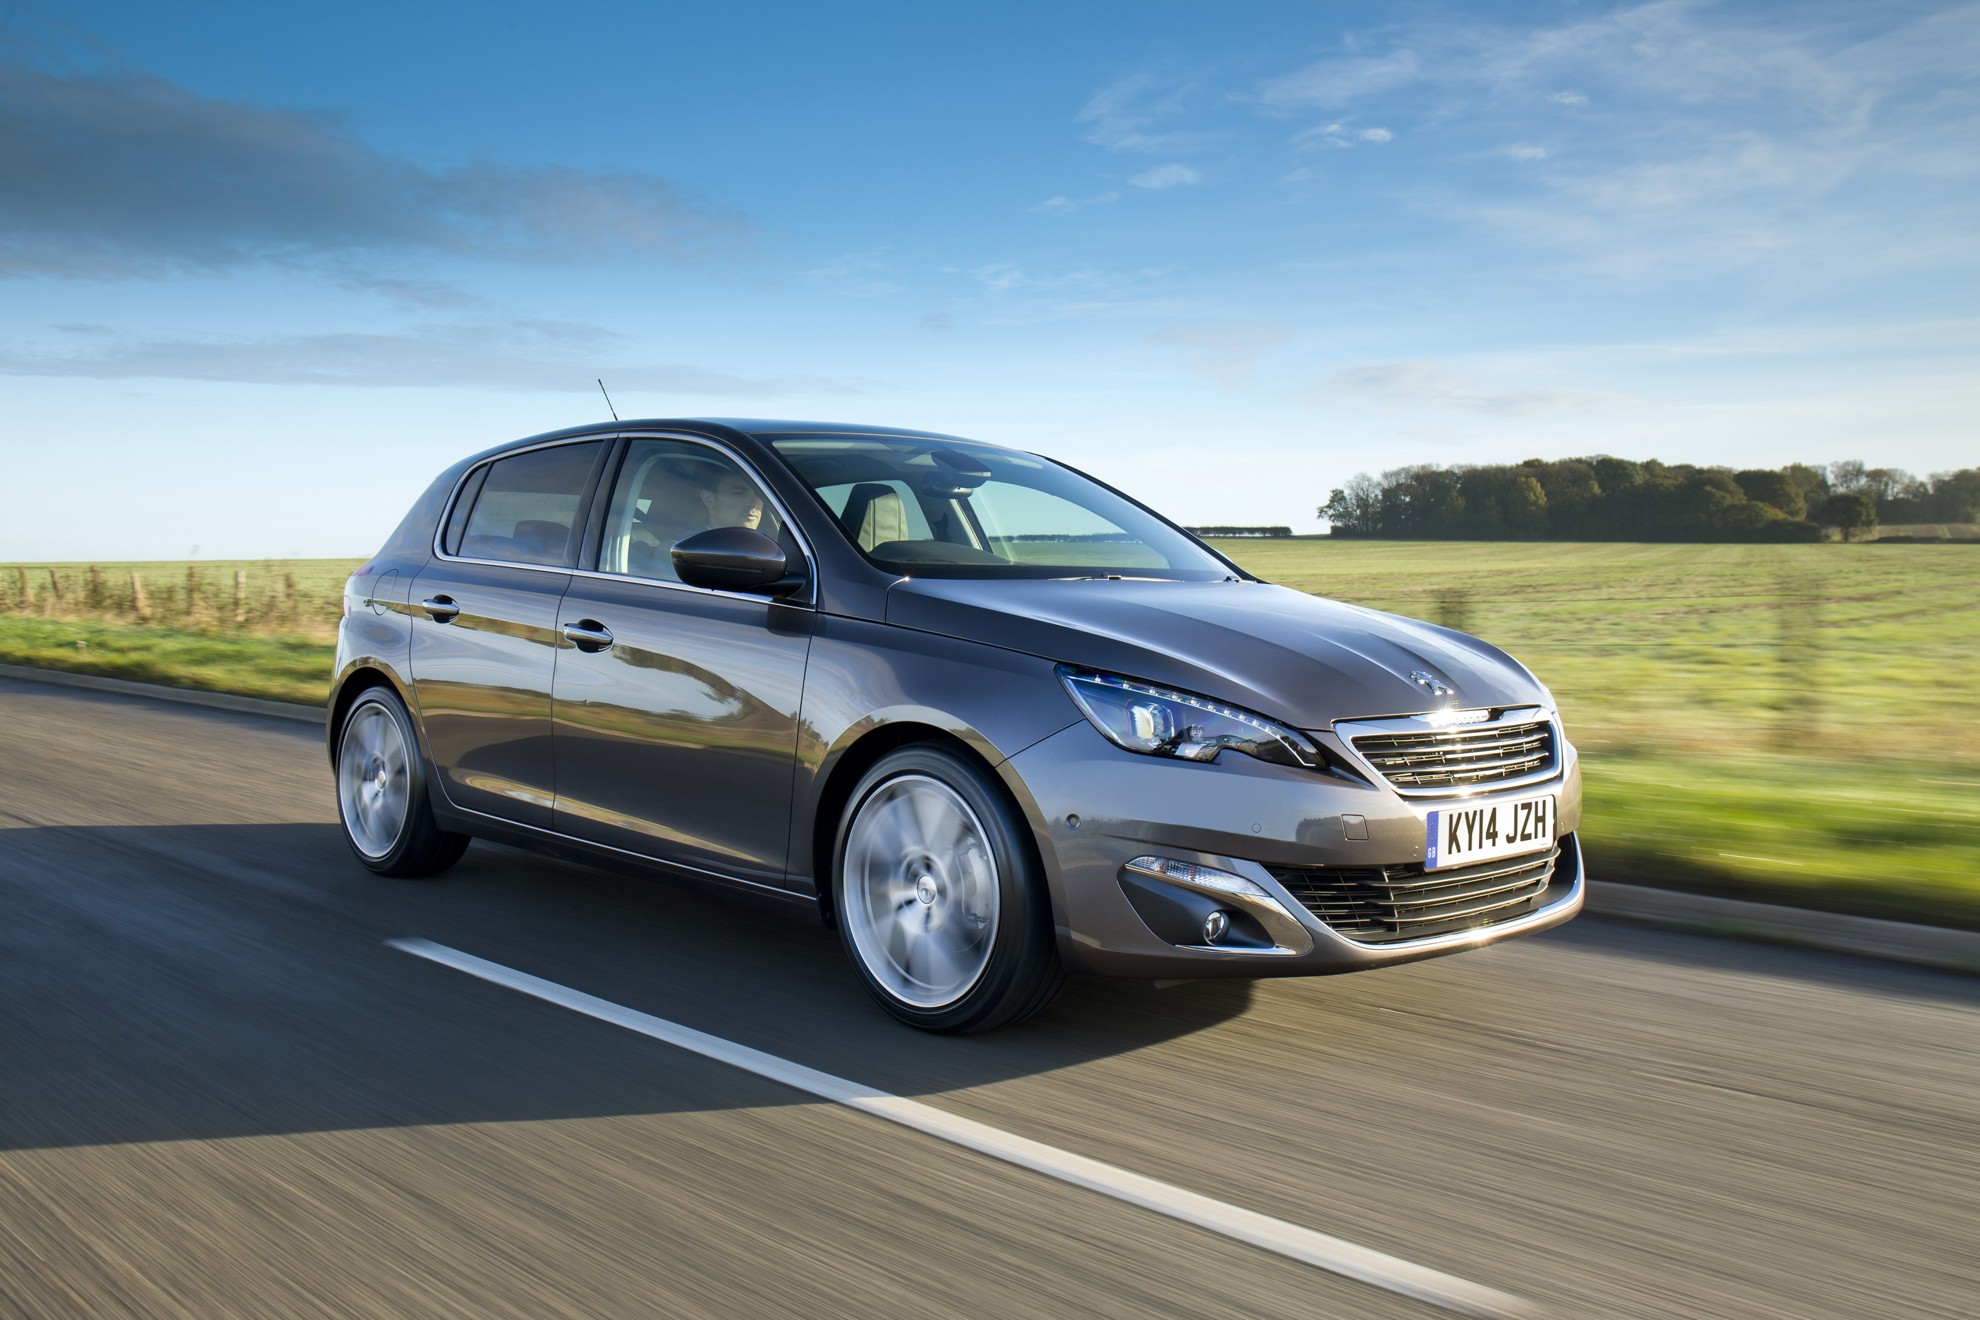 Peugeot 308 voted Car of the Year